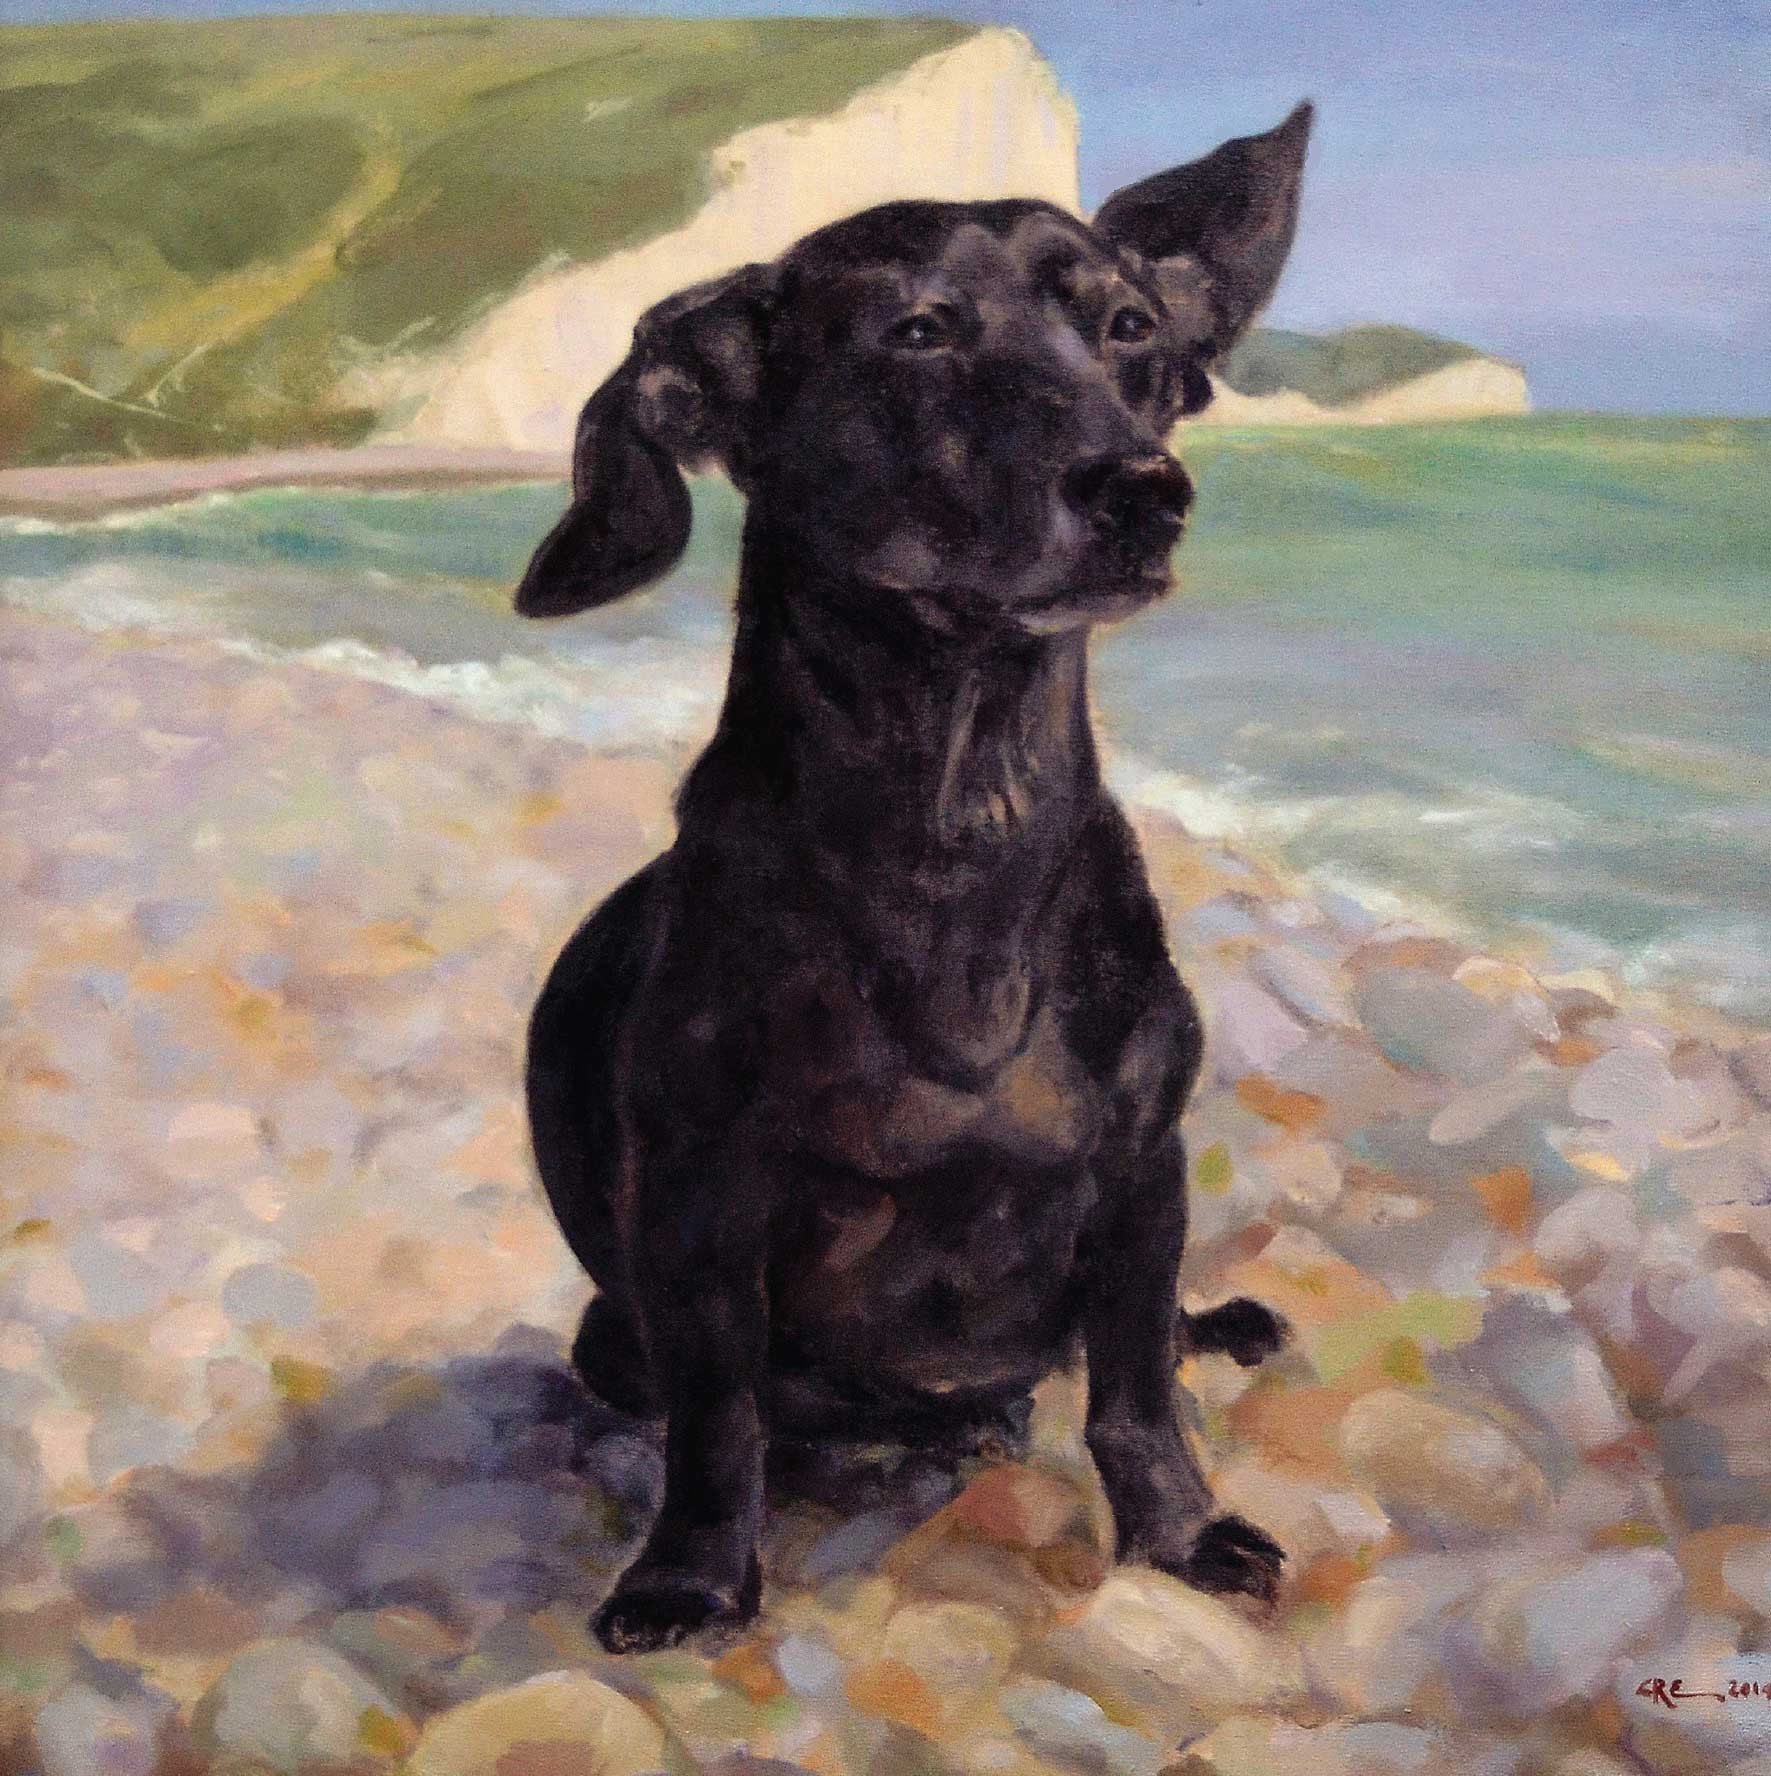 Patrick by Claire Eastgate, Fine Art Greeting Card, Oil on Linen, Dog on pebbly beach